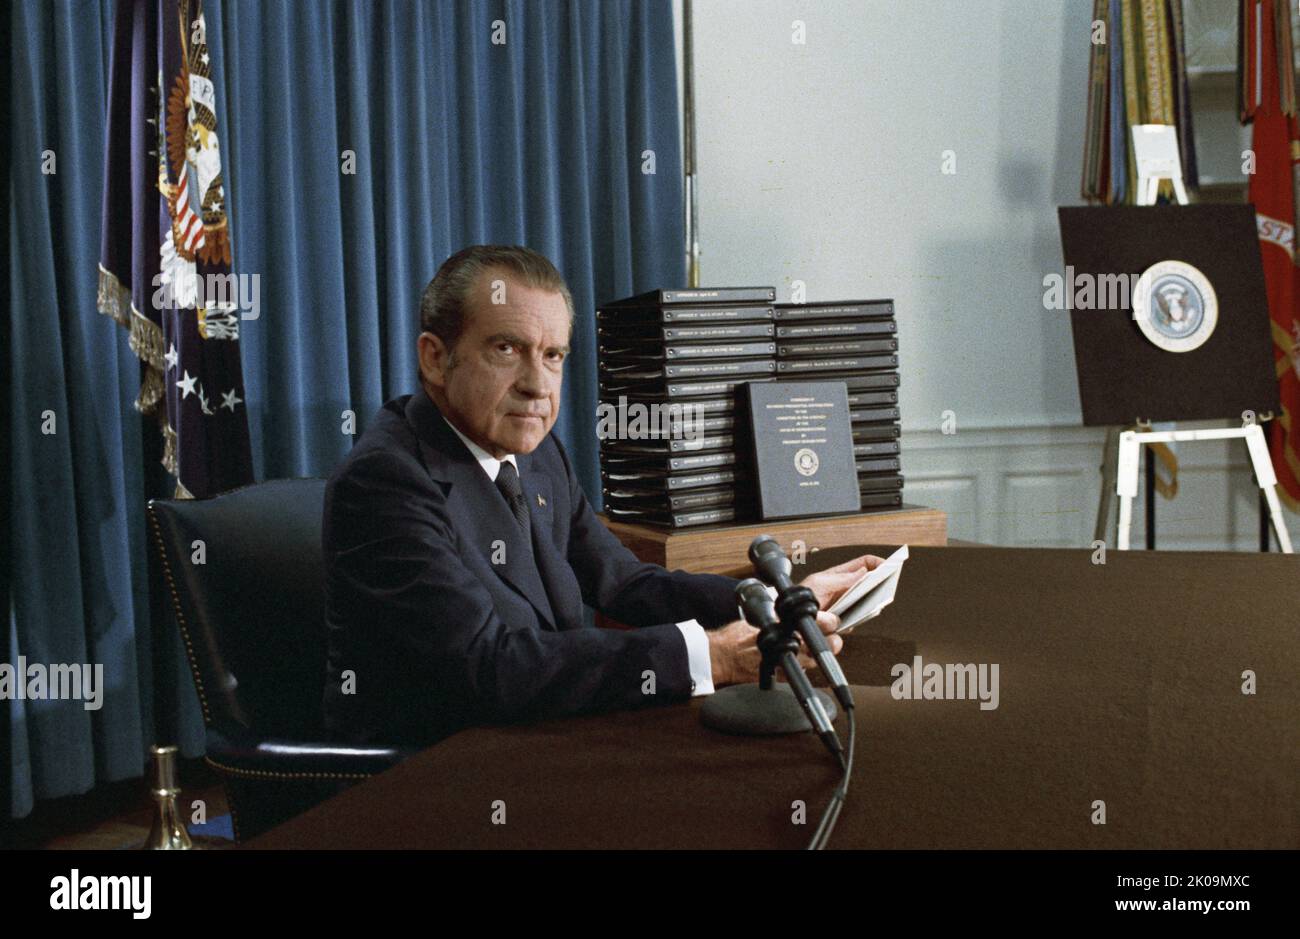 Richard Nixon (1913 - 1994) president of the United States, serving from 1969 to 1974. A member of the Republican Party, Nixon previously served as the 36th vice president from 1953 to 1961, he became the only president to resign from the office, following the Watergate scandal. Stock Photo